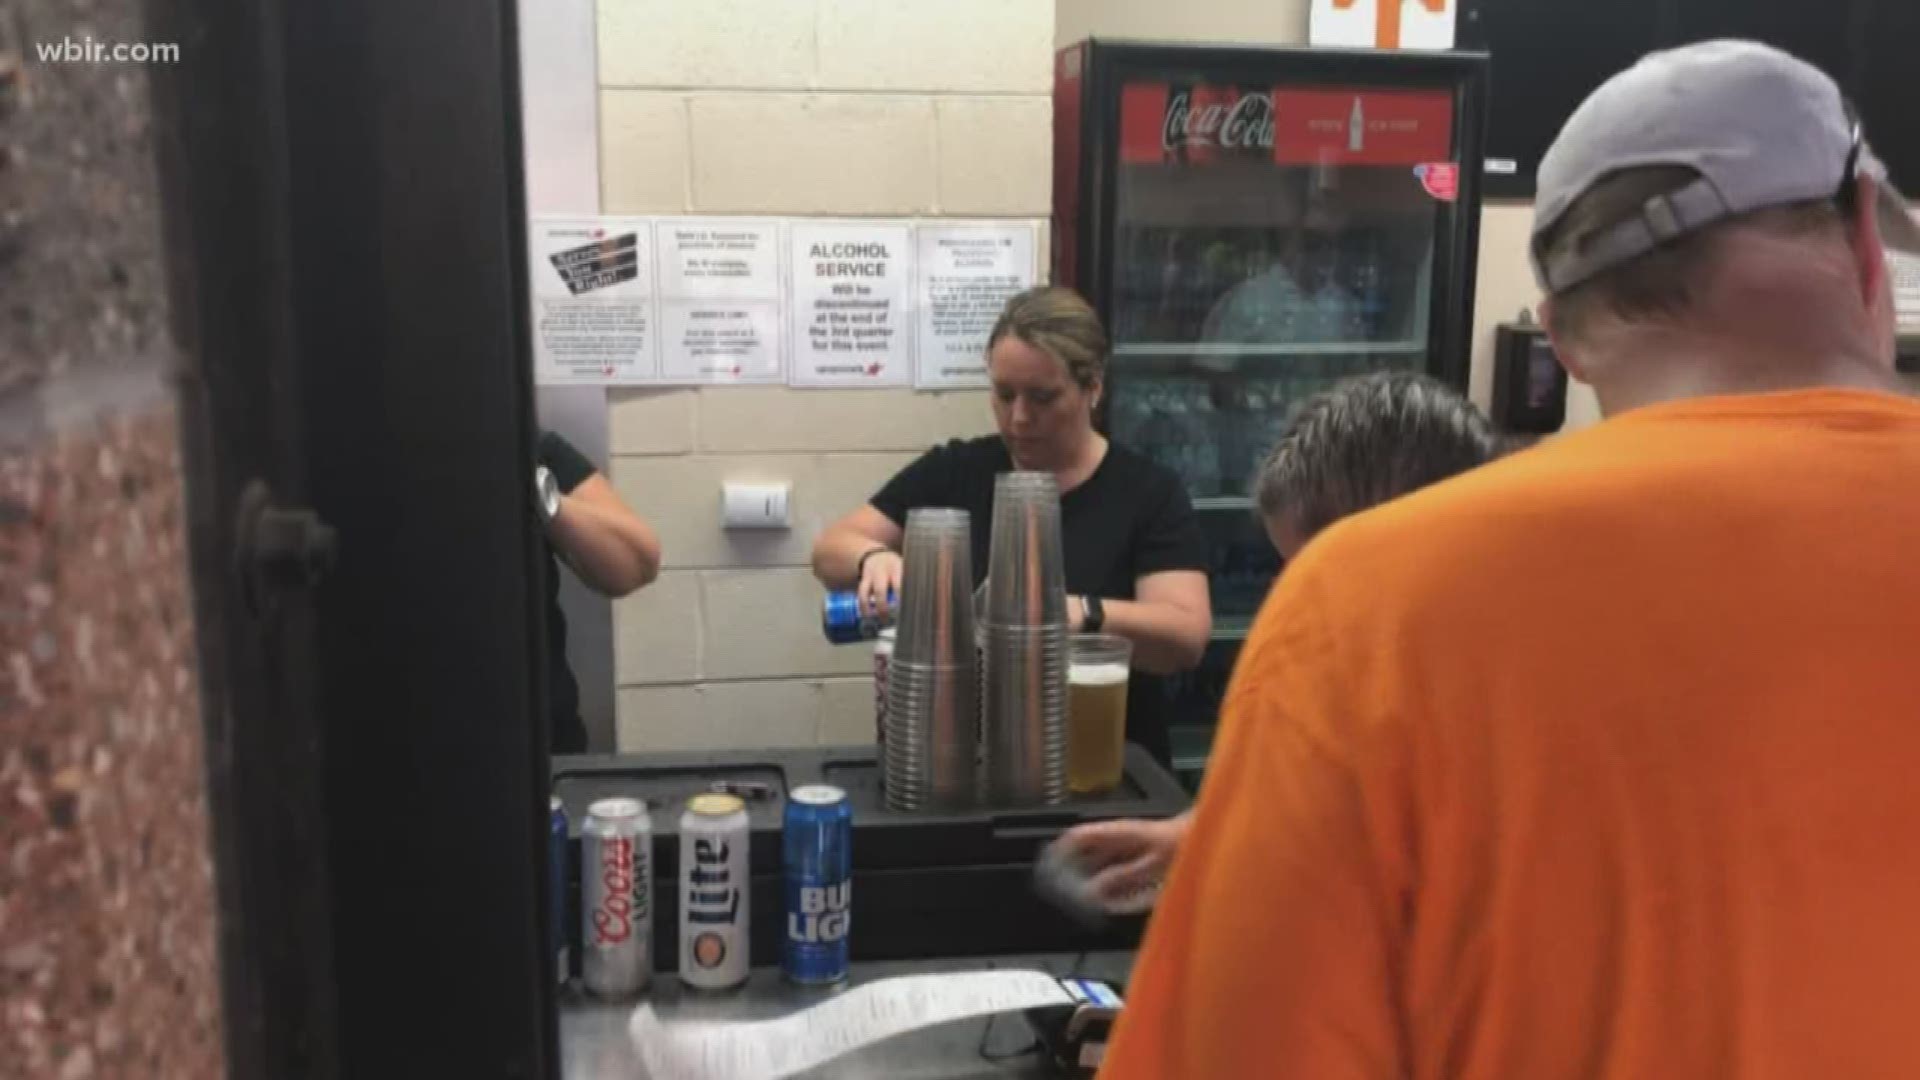 The university hasn't announced any plans to look at local brews, but they did use Saturday as a test run to see what they can do better and how the sale of alcohol impacts the overall fan experience.